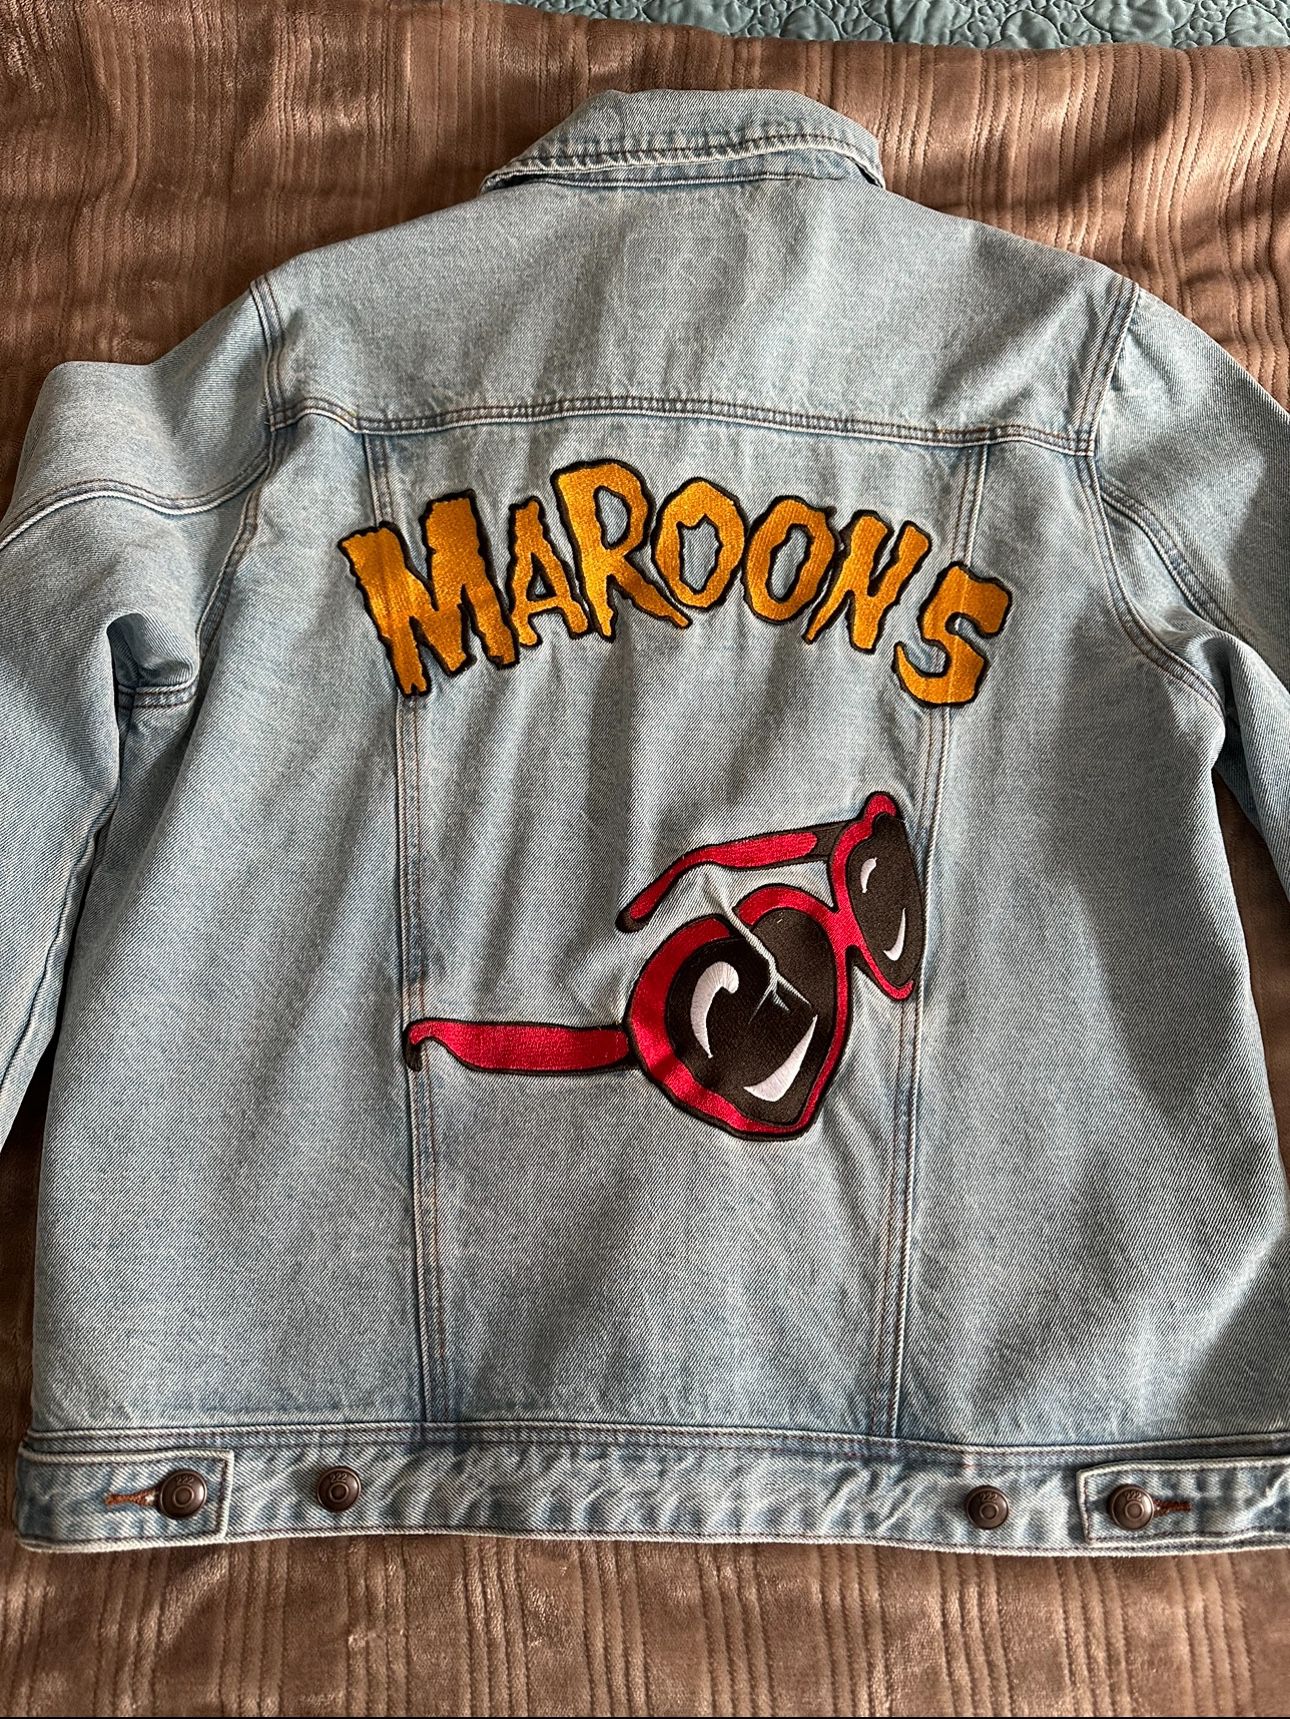 Levi Brand Jacket Maroon 5 In Concert Only Purchased 